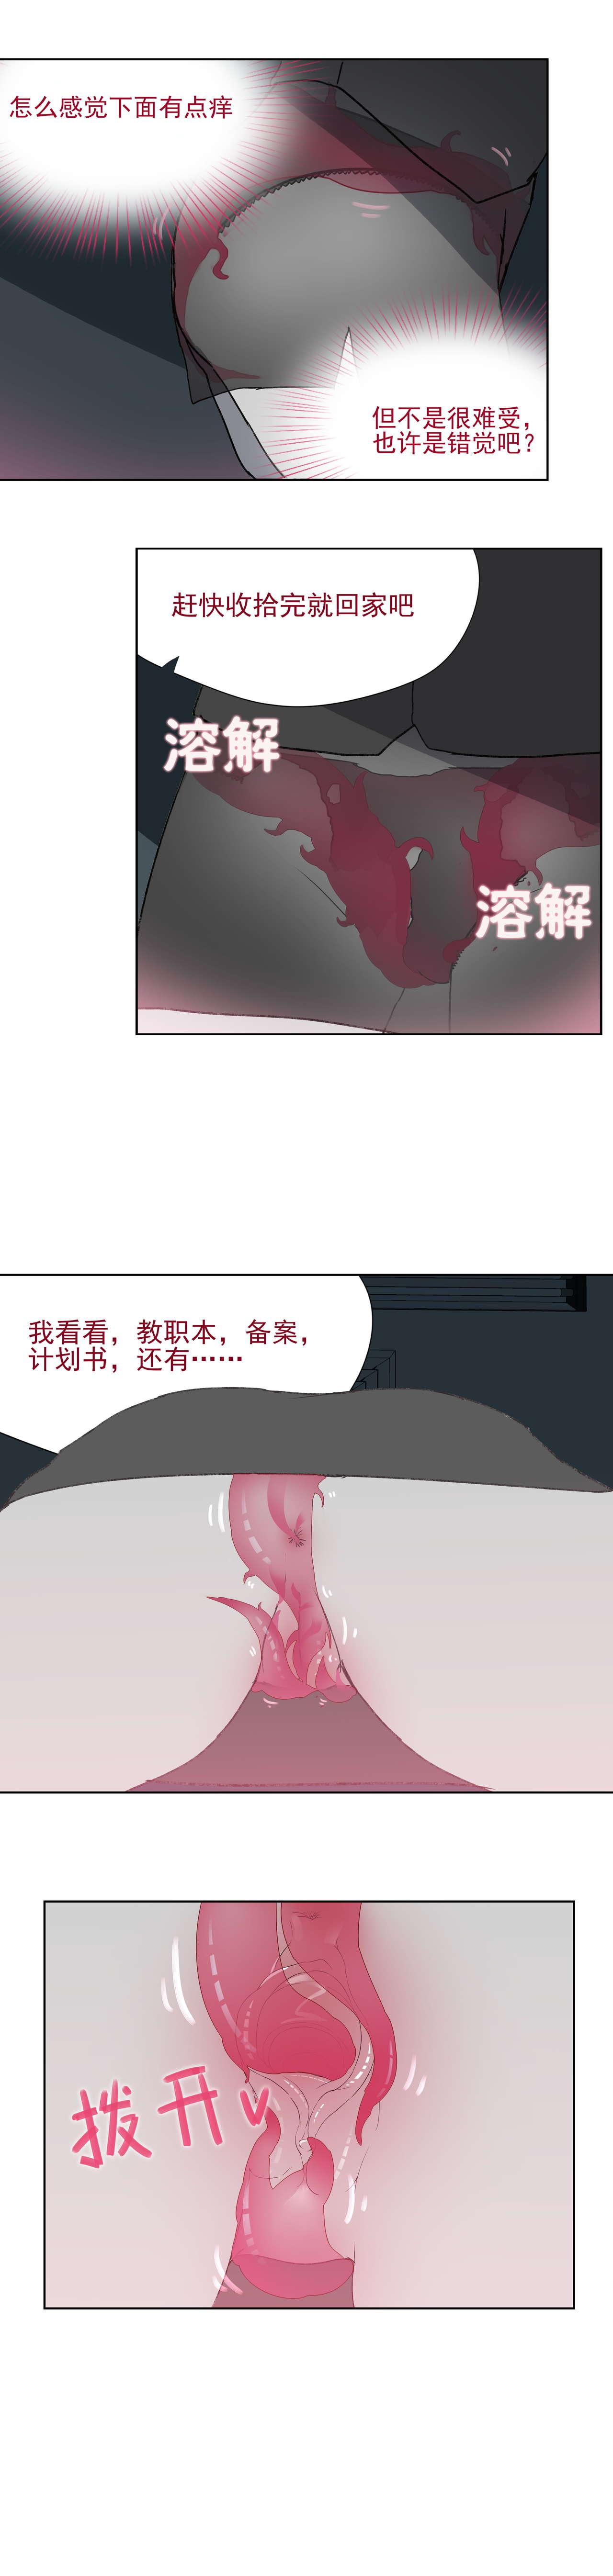 Flogging 寄生之恋 Tentacle love - Original Gay Domination - Page 5